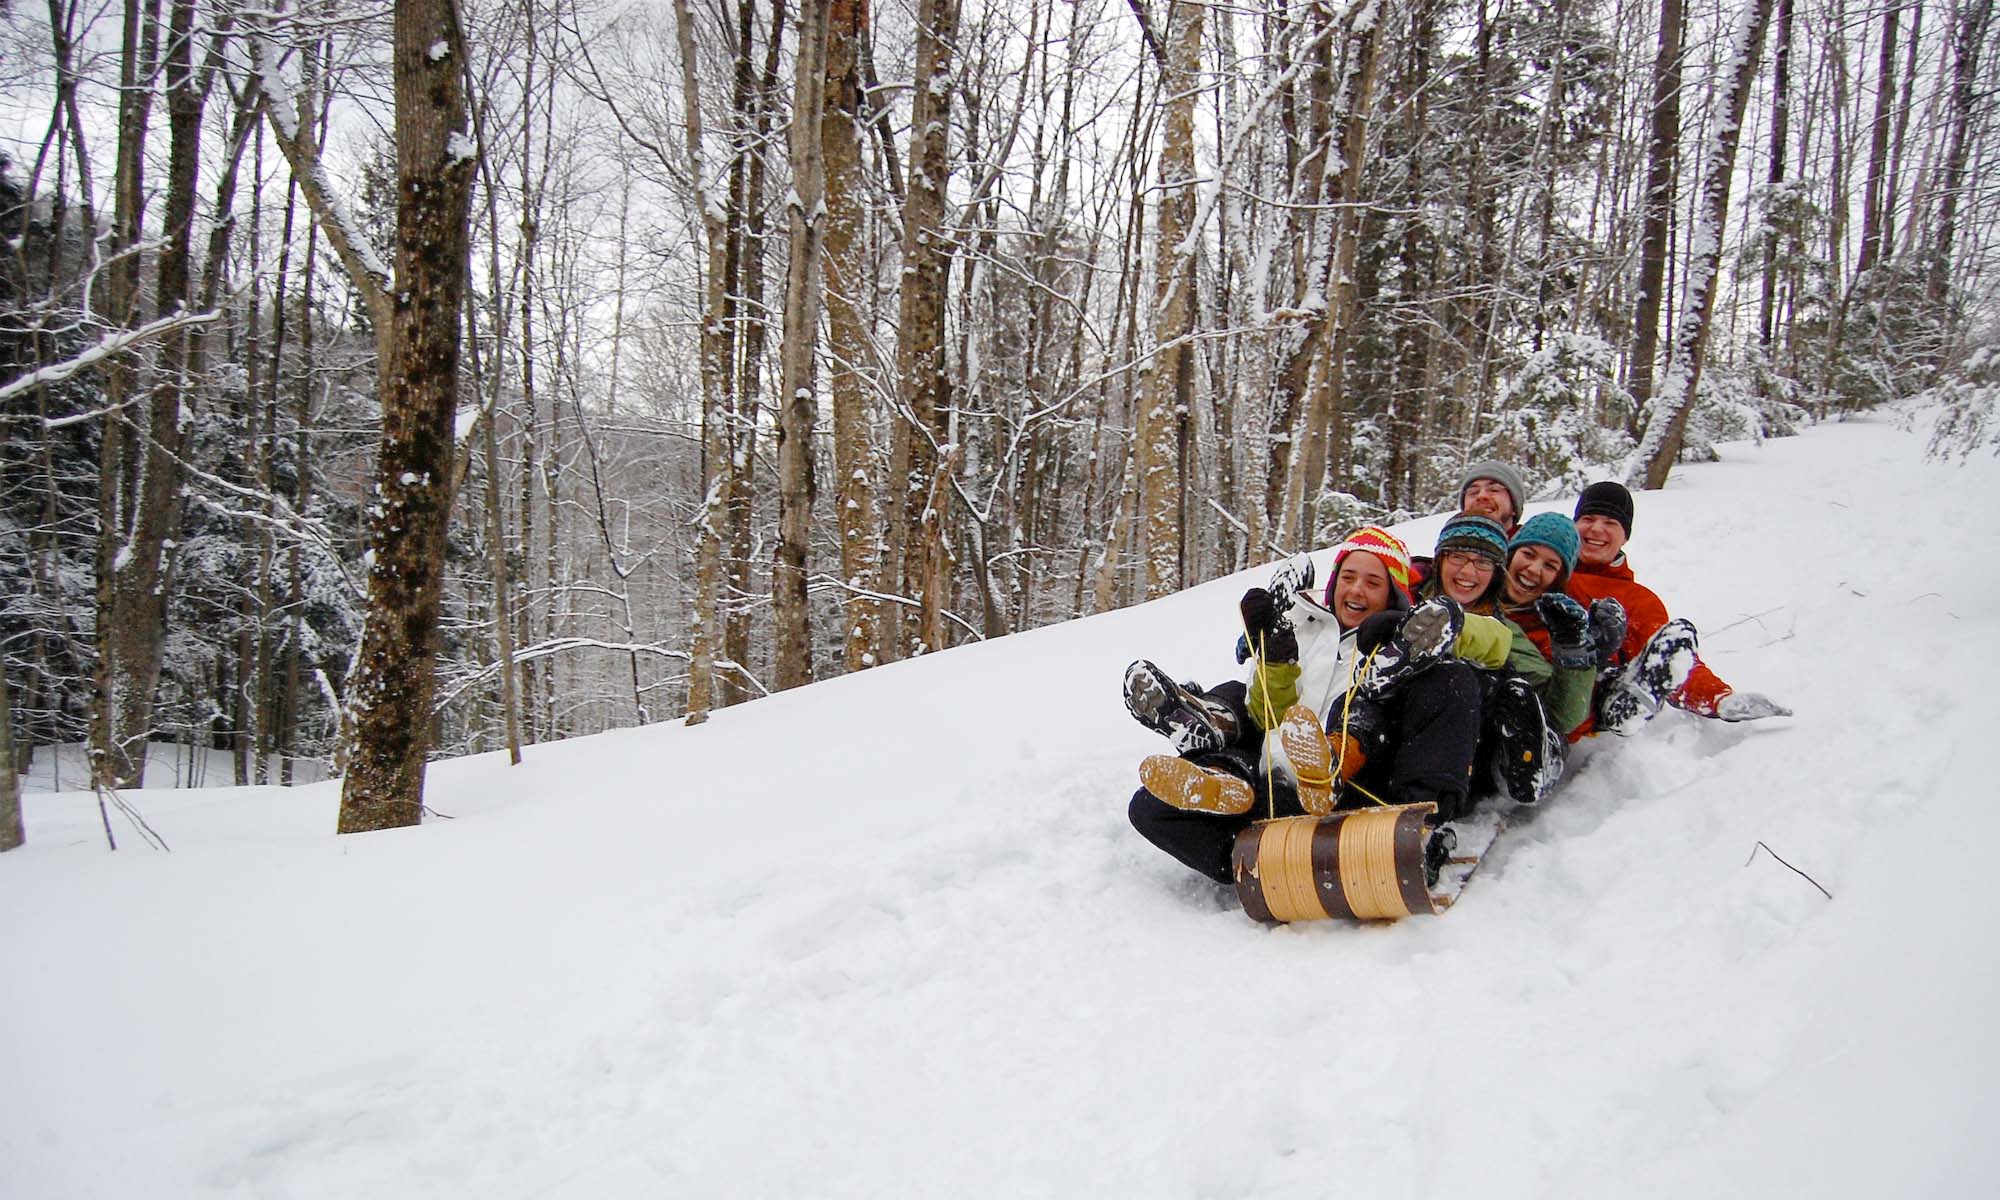 A group of female and male college students are riding on a toboggan down a snow covered trail in a forest.